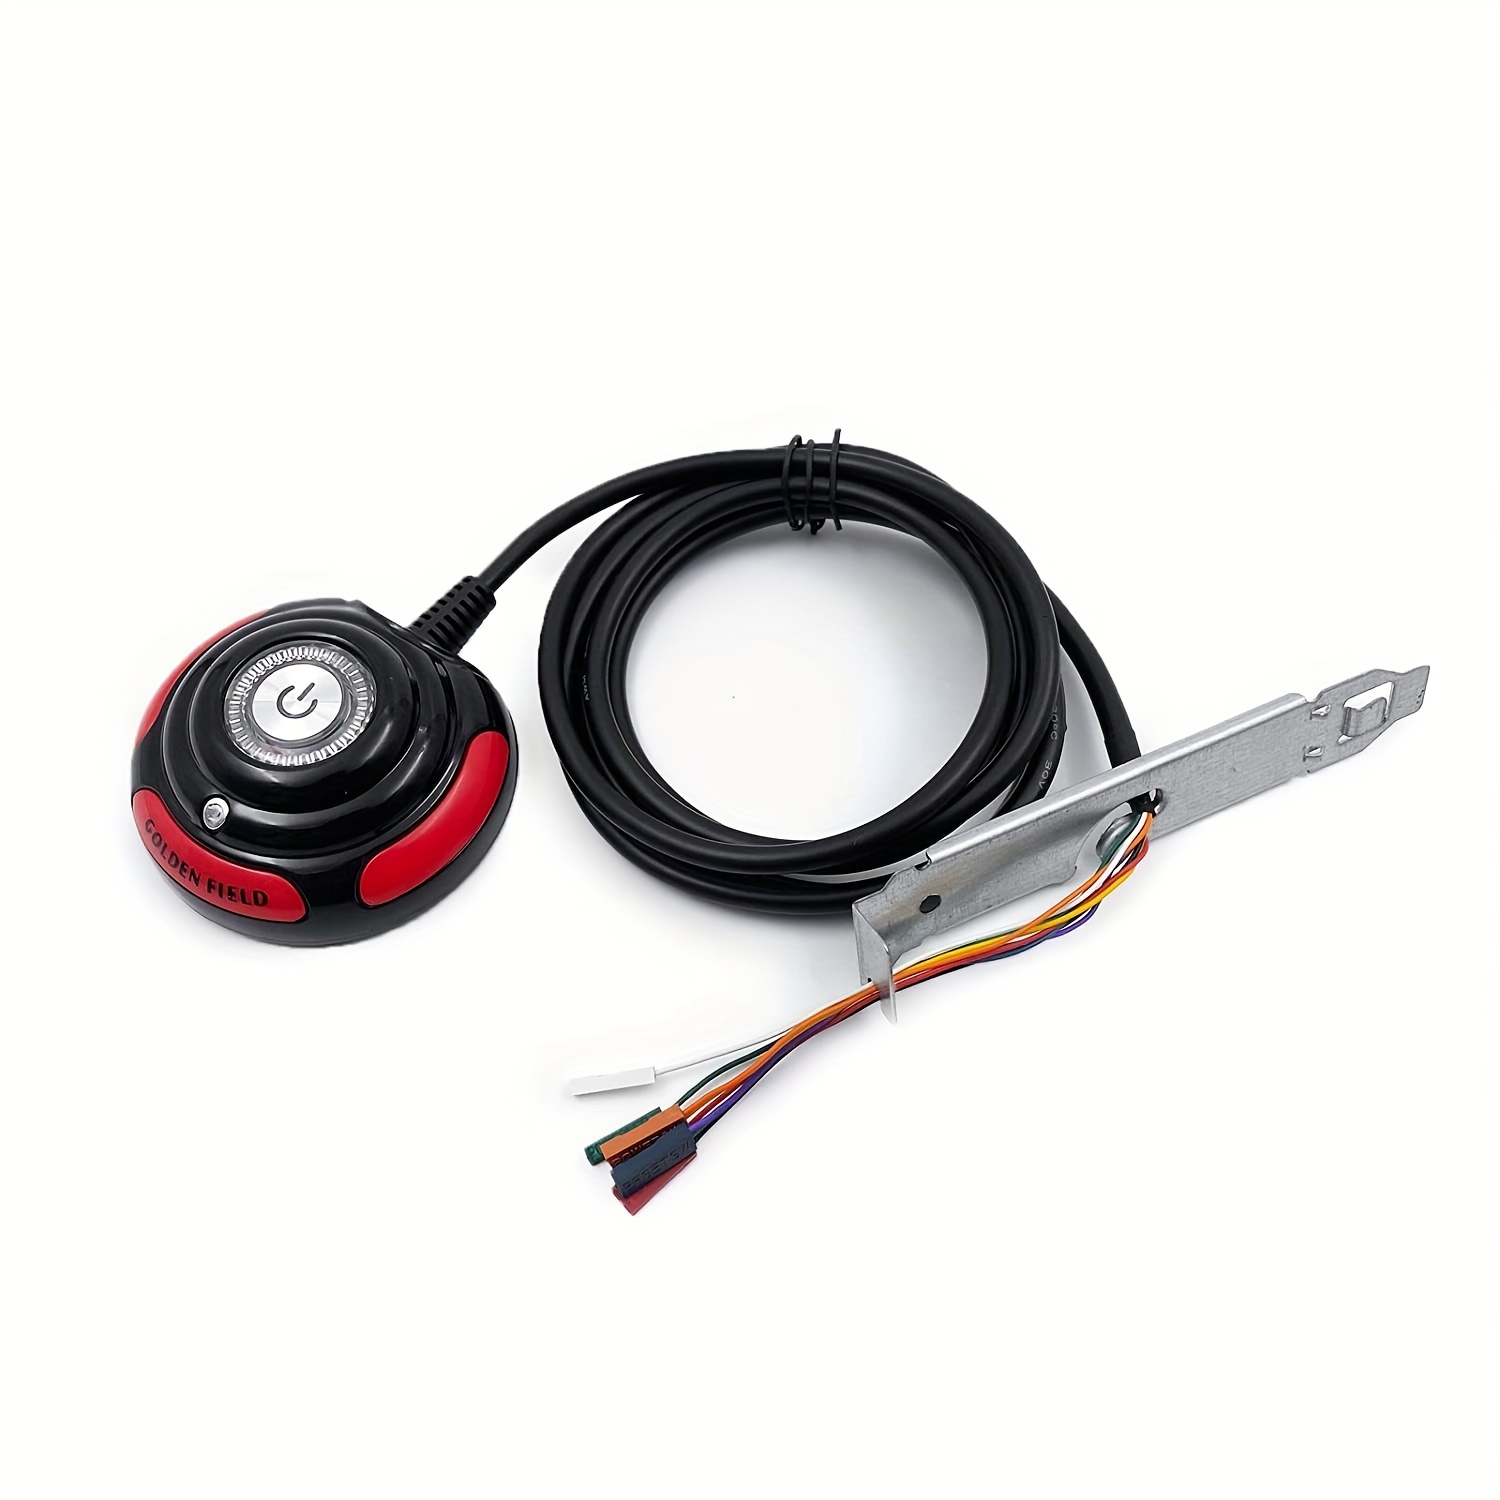 Desktop Light Up Power and Reset Button Switch 1.6M - Black/Red  AE-DESKTOP-SWITCH